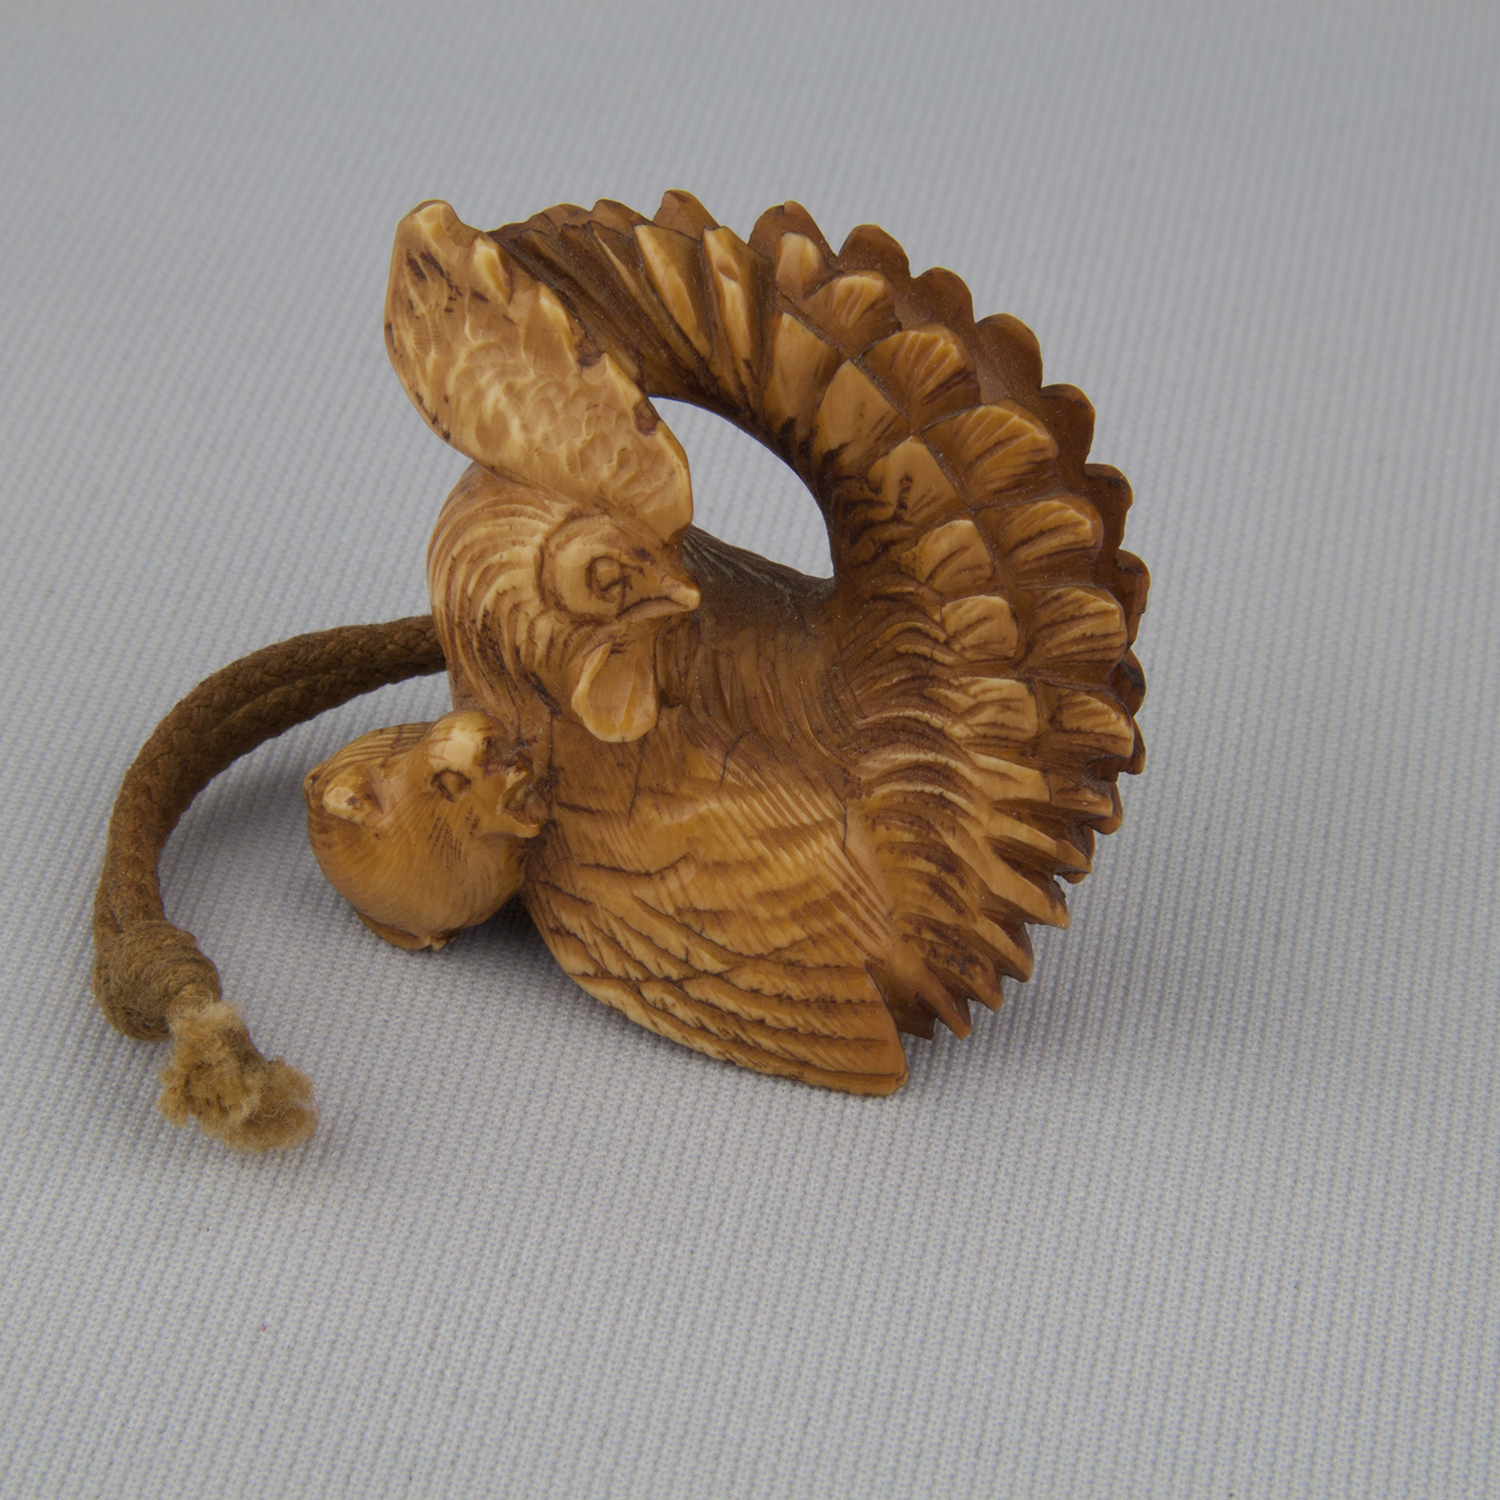 Netsuke depicting a rooster and chick, ca. 18th–19th century, tea-stained ivory, The Herman D. Doochin Collection, 1992.174 